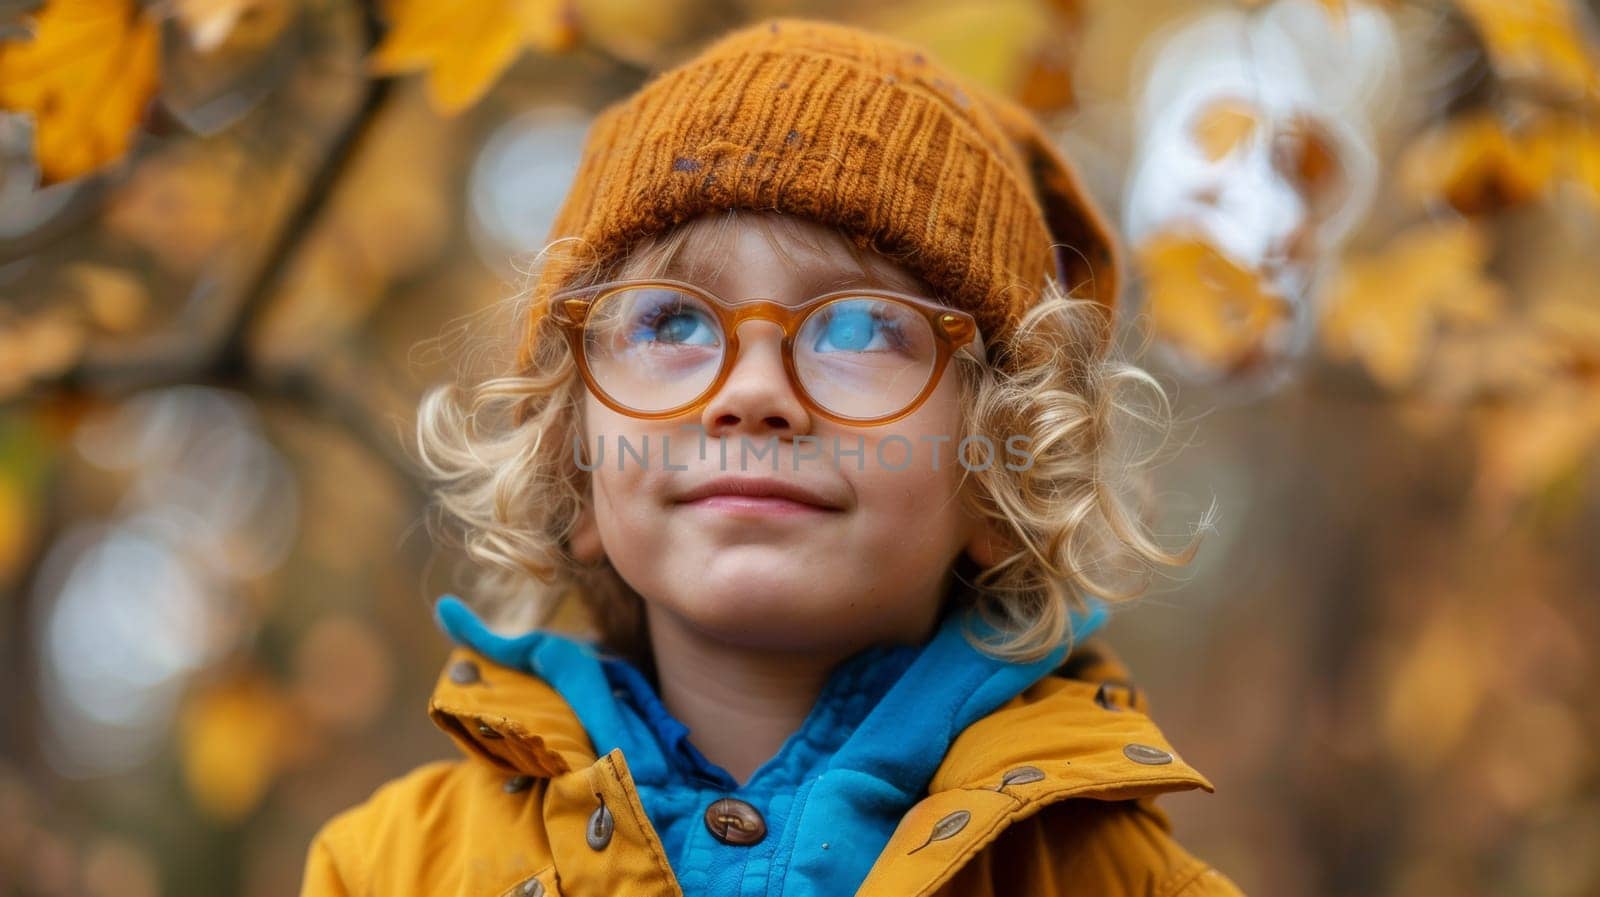 A little boy wearing a hat and glasses with leaves in the background